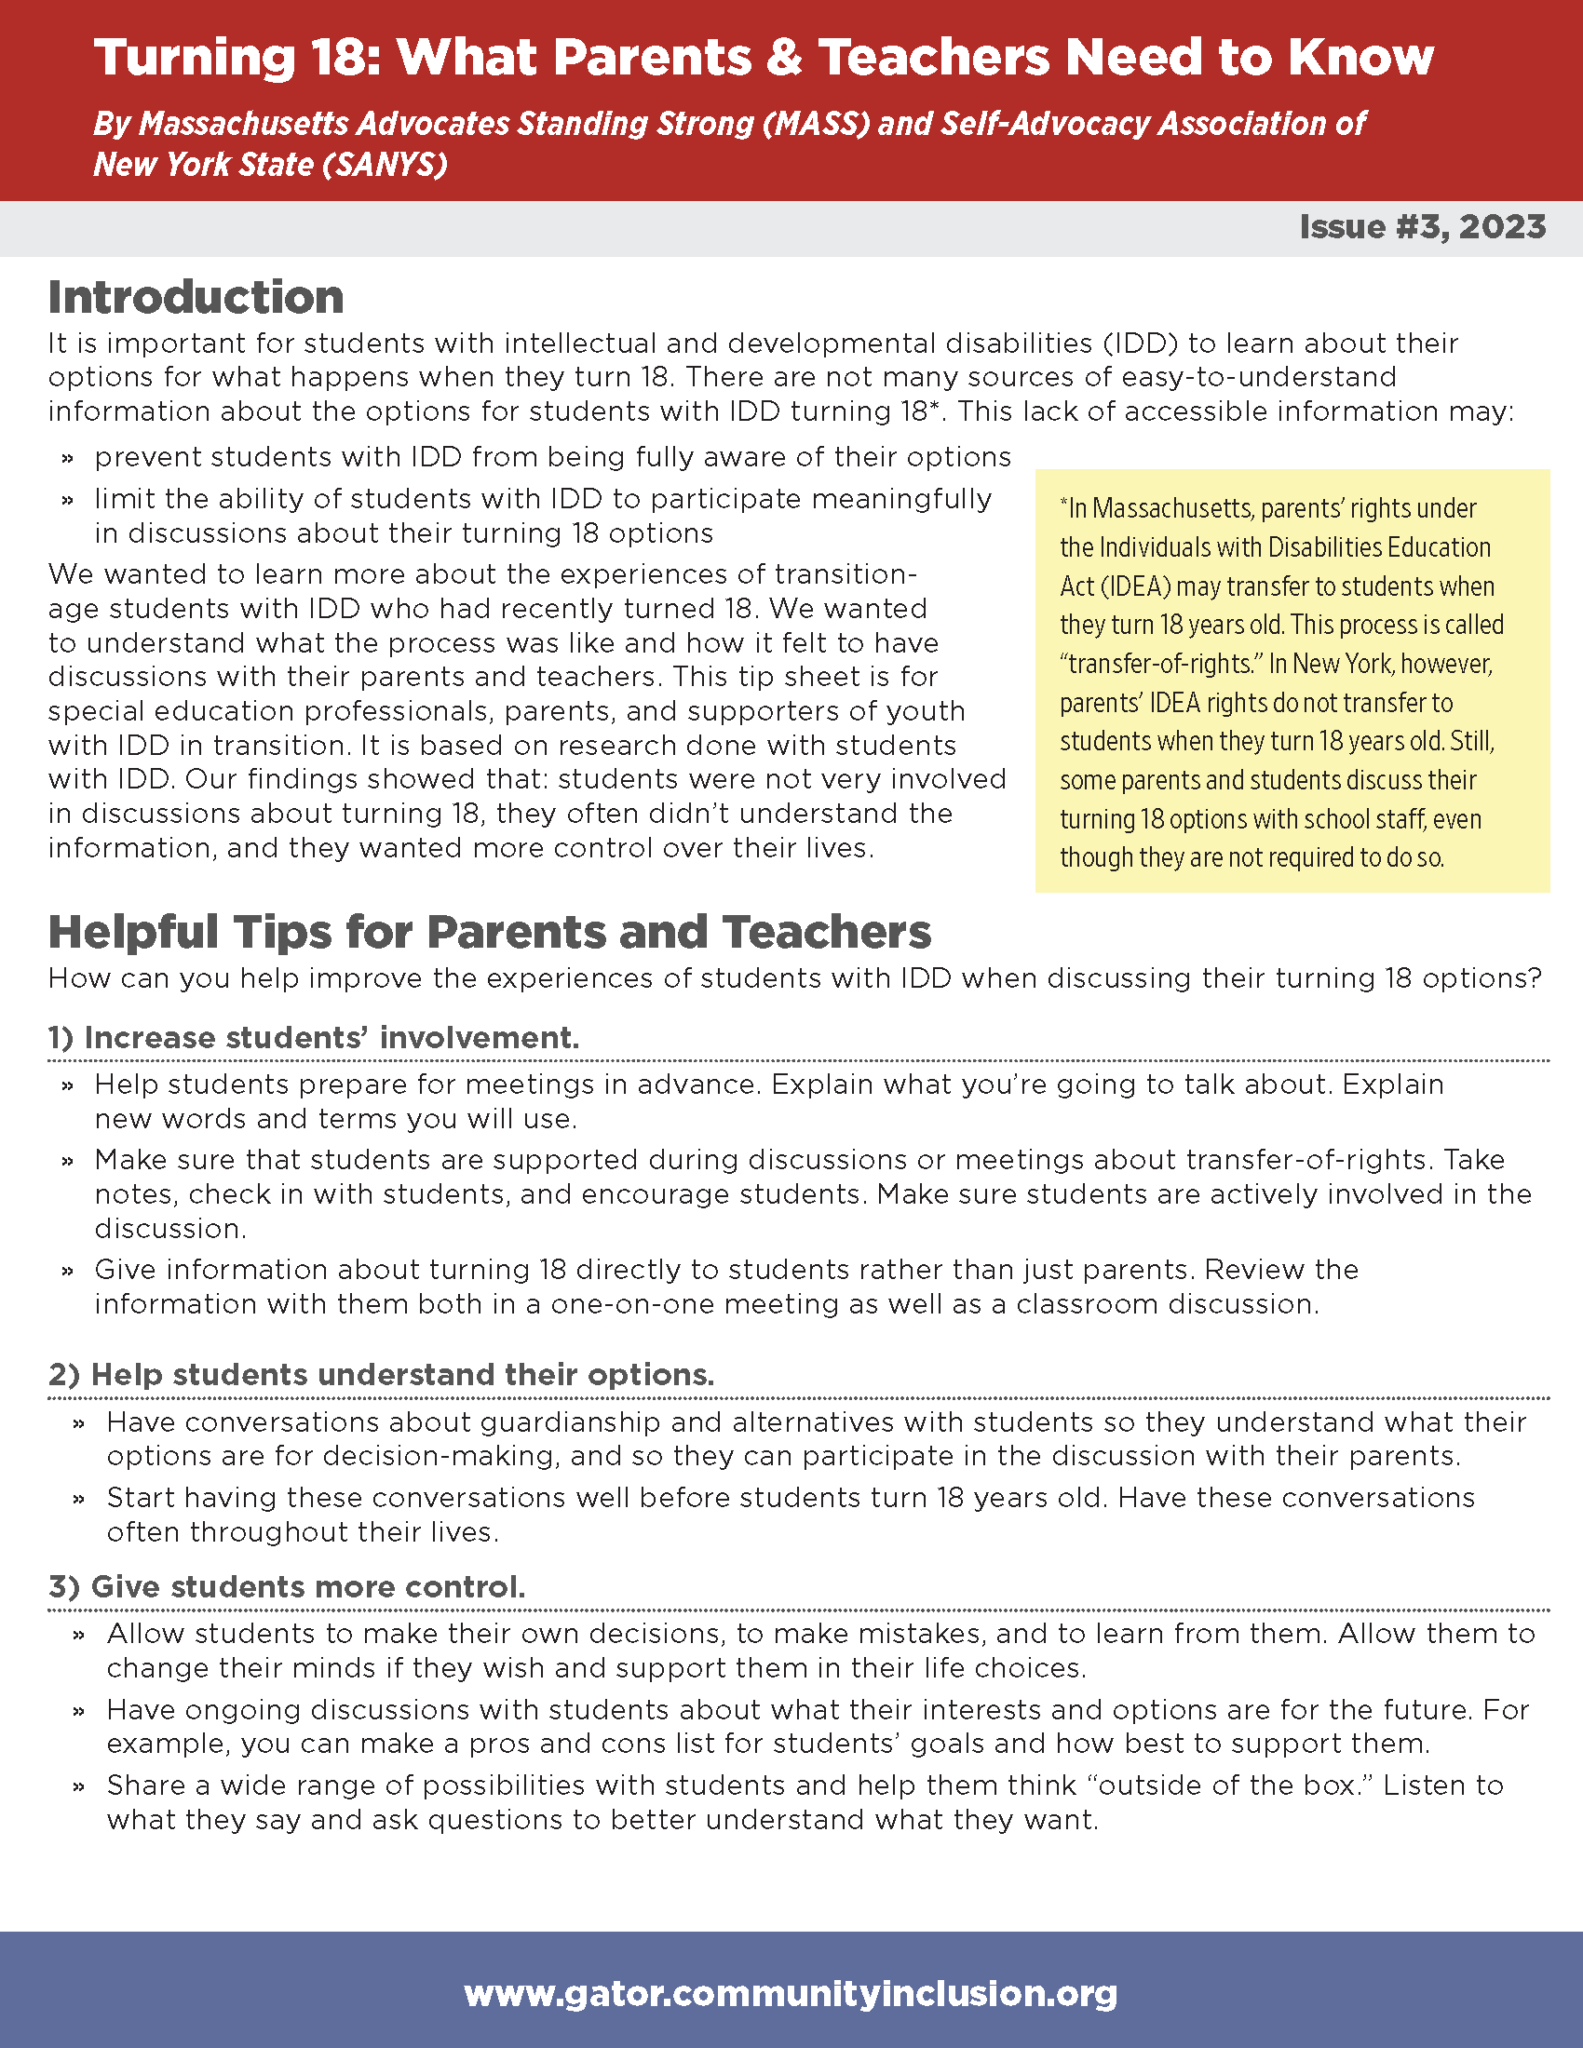 Preview of the first page for a tip sheet to help parents and teachers support individuals with IDD when they're turning 18